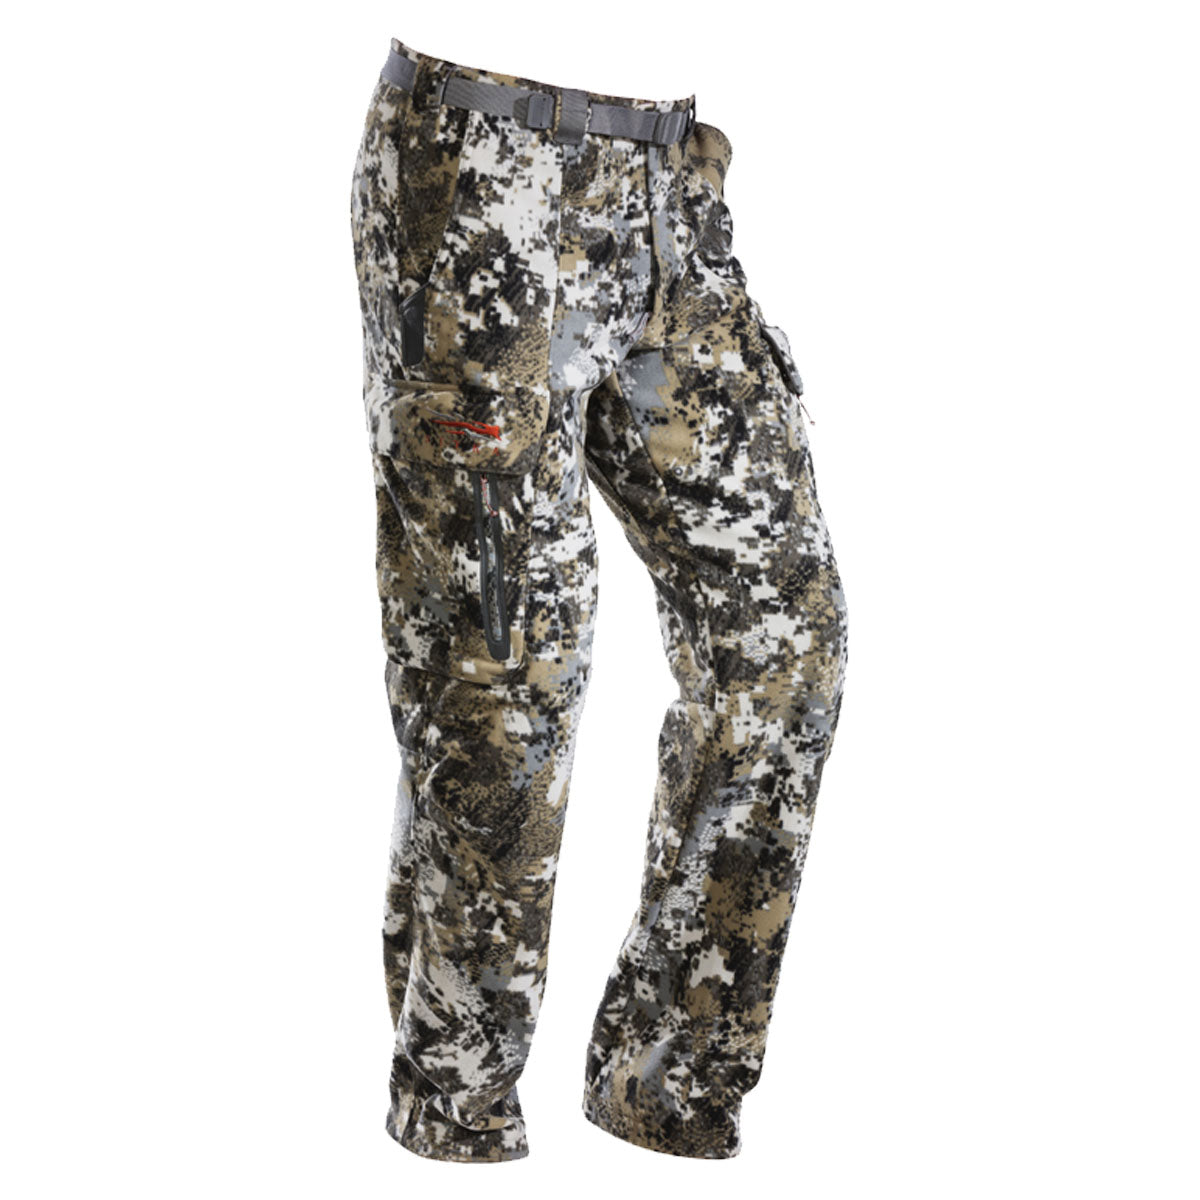 Sitka Stratus Pant in  by GOHUNT | Sitka - GOHUNT Shop